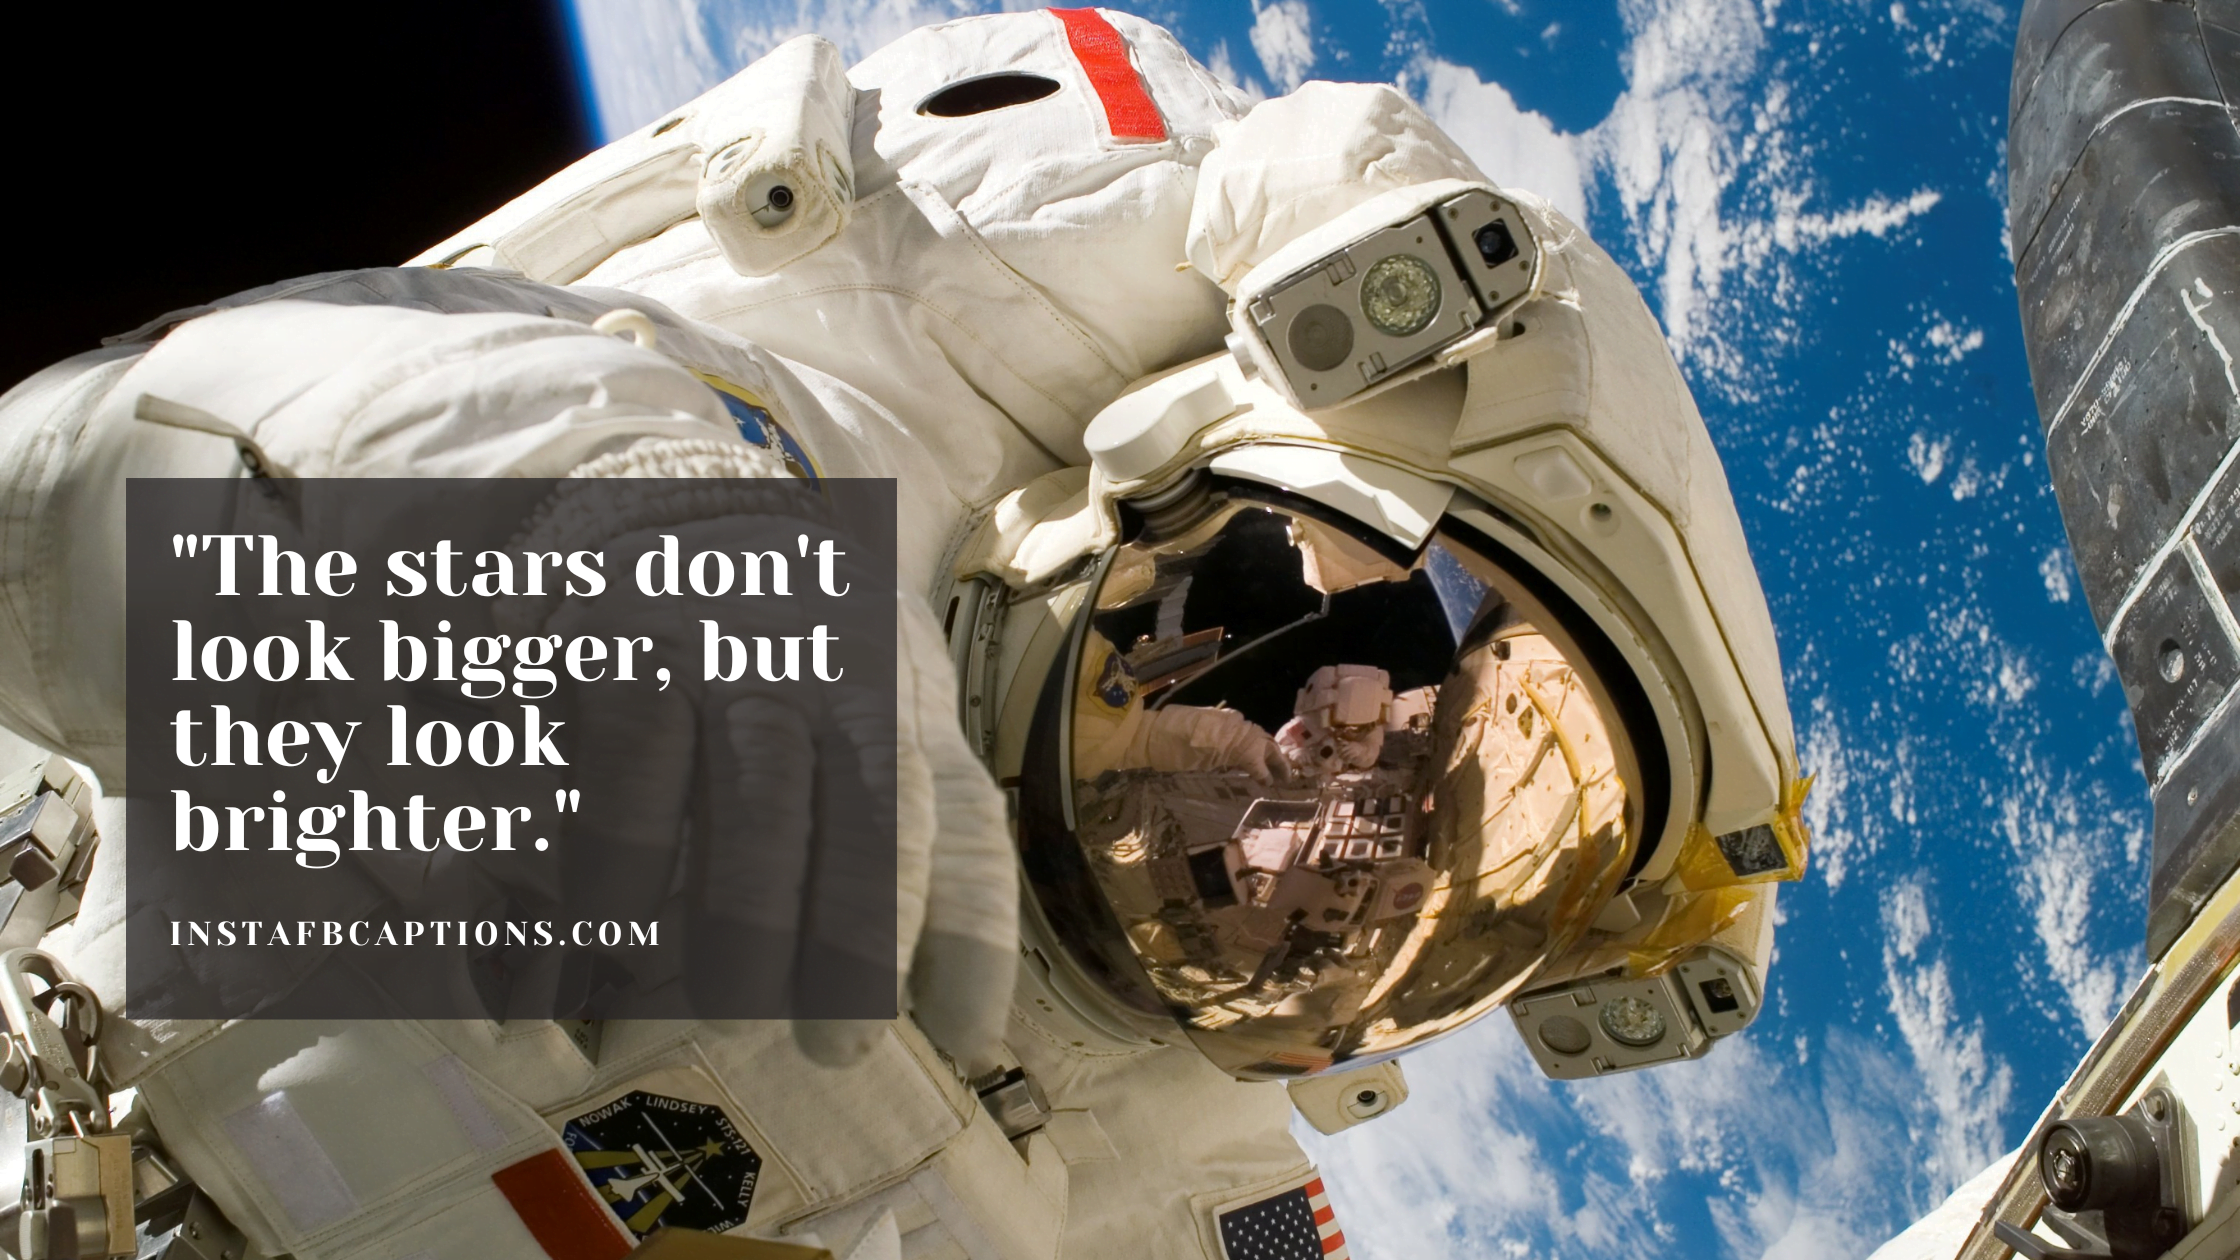 Female Astronaut Quotes  - Female Astronaut Quotes - [New] Astronaut Captions Quotes for Instagram in 2023